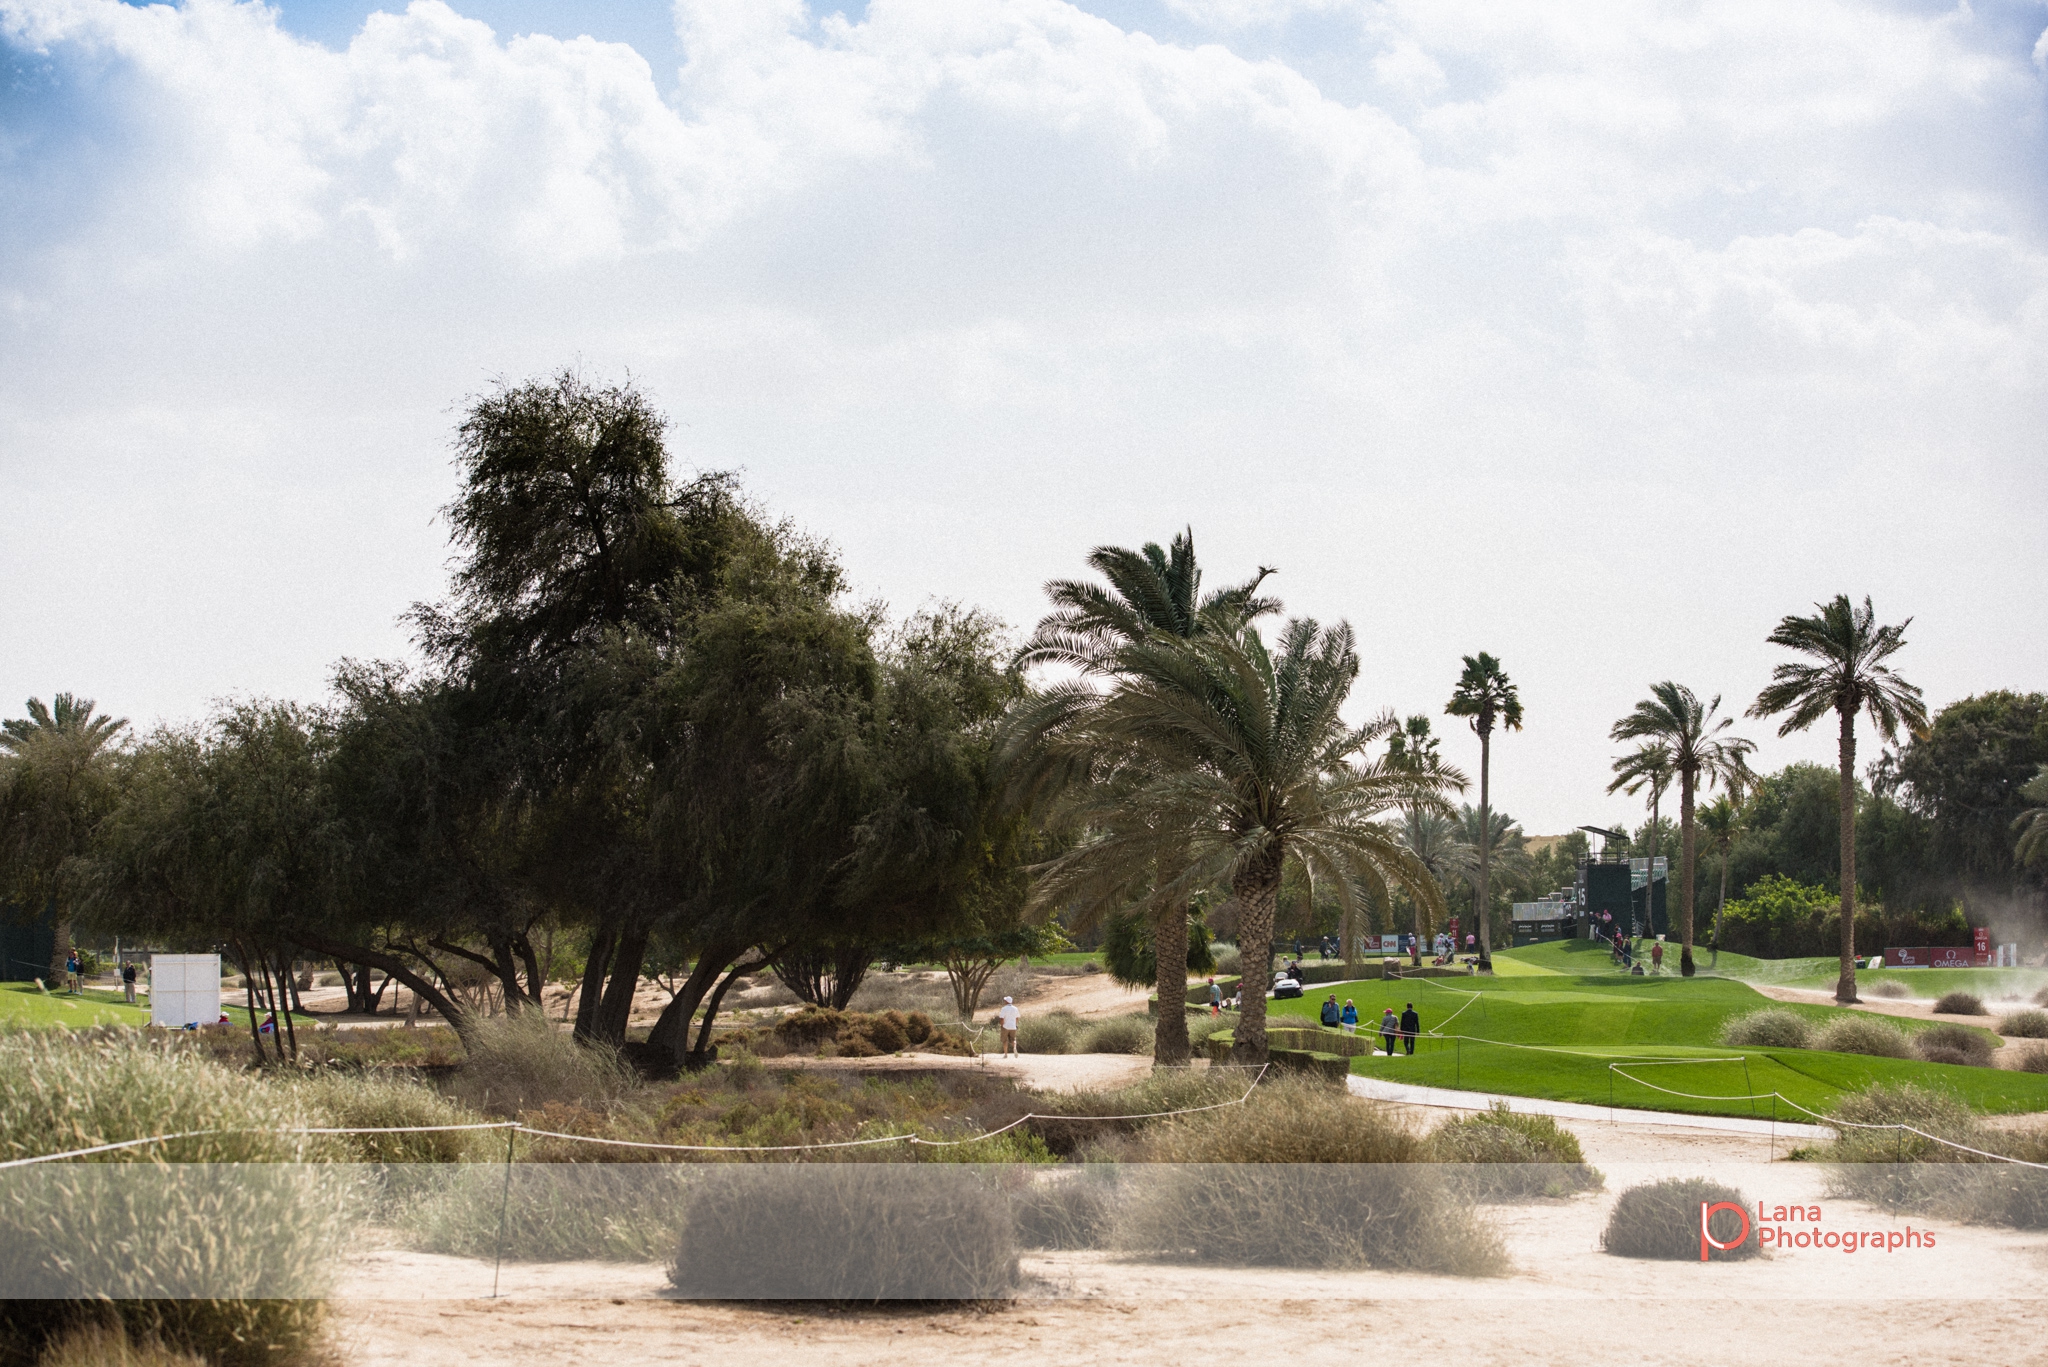  A view of the grounds at the Emirates Golf Course in Dubai during February 2017 